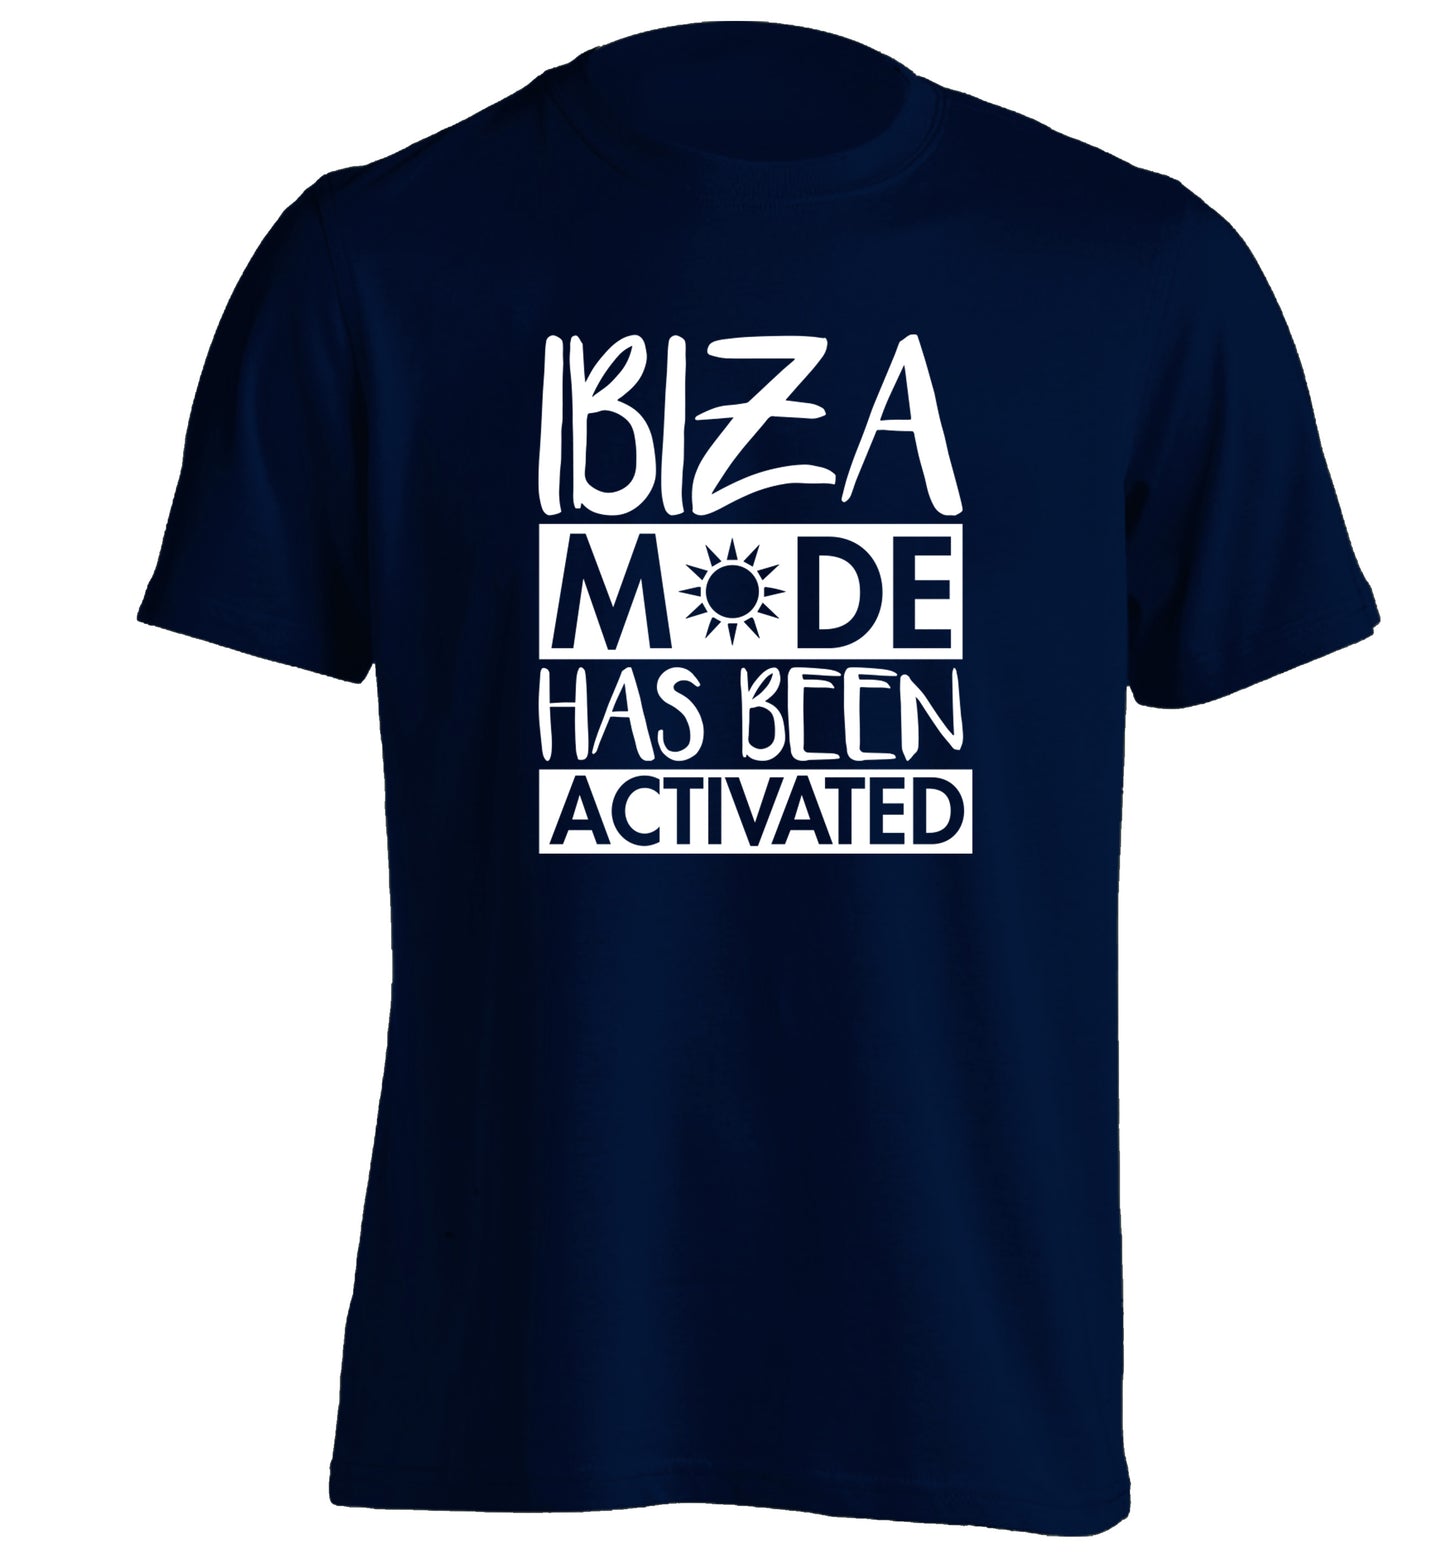 Ibiza mode has been activated adults unisex navy Tshirt 2XL